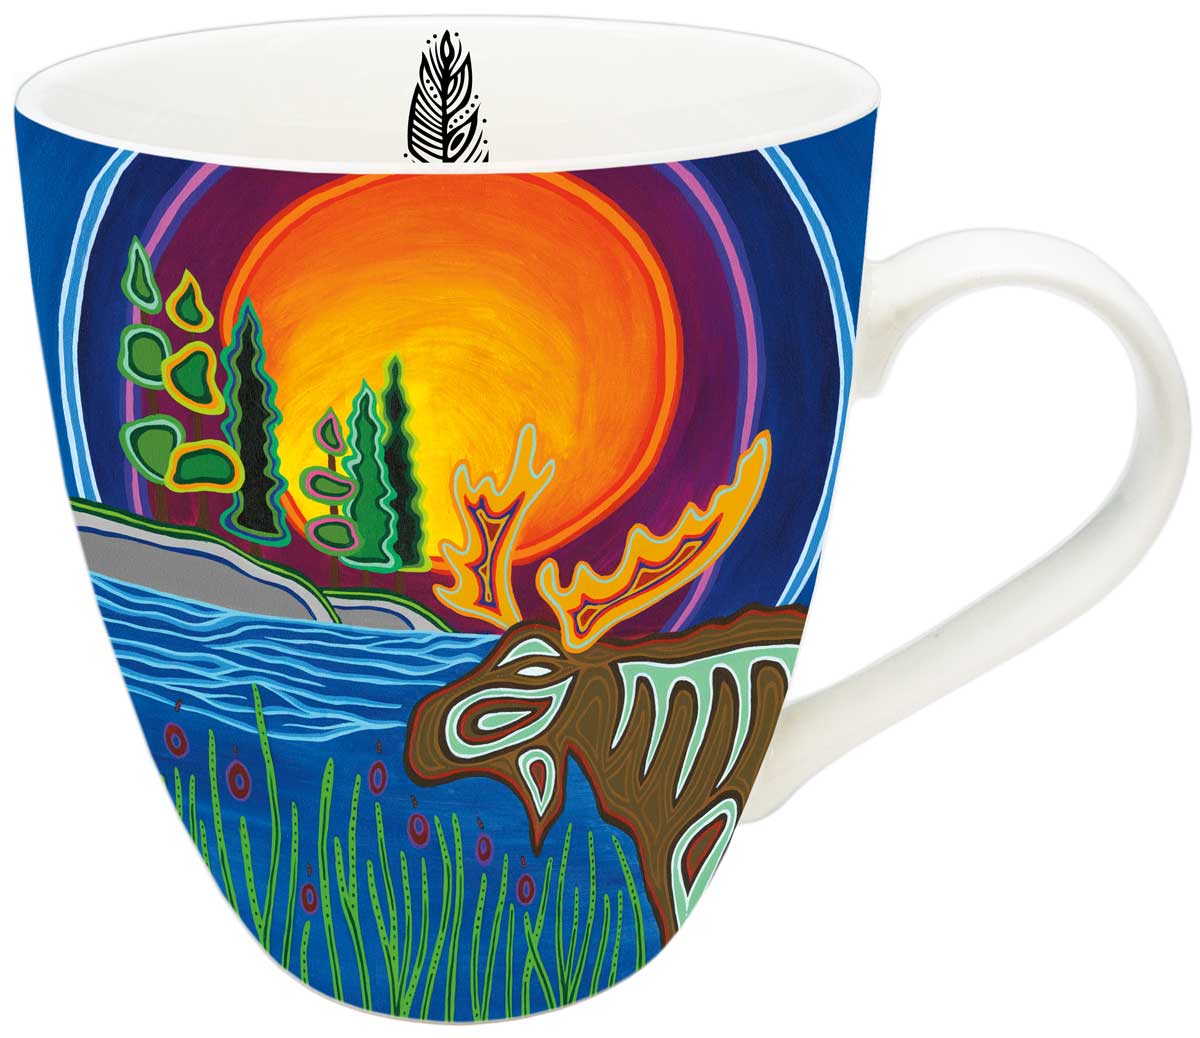 Mug Spirit Of The Mooz - Mug Spirit Of The Mooz -  - House of Himwitsa Native Art Gallery and Gifts